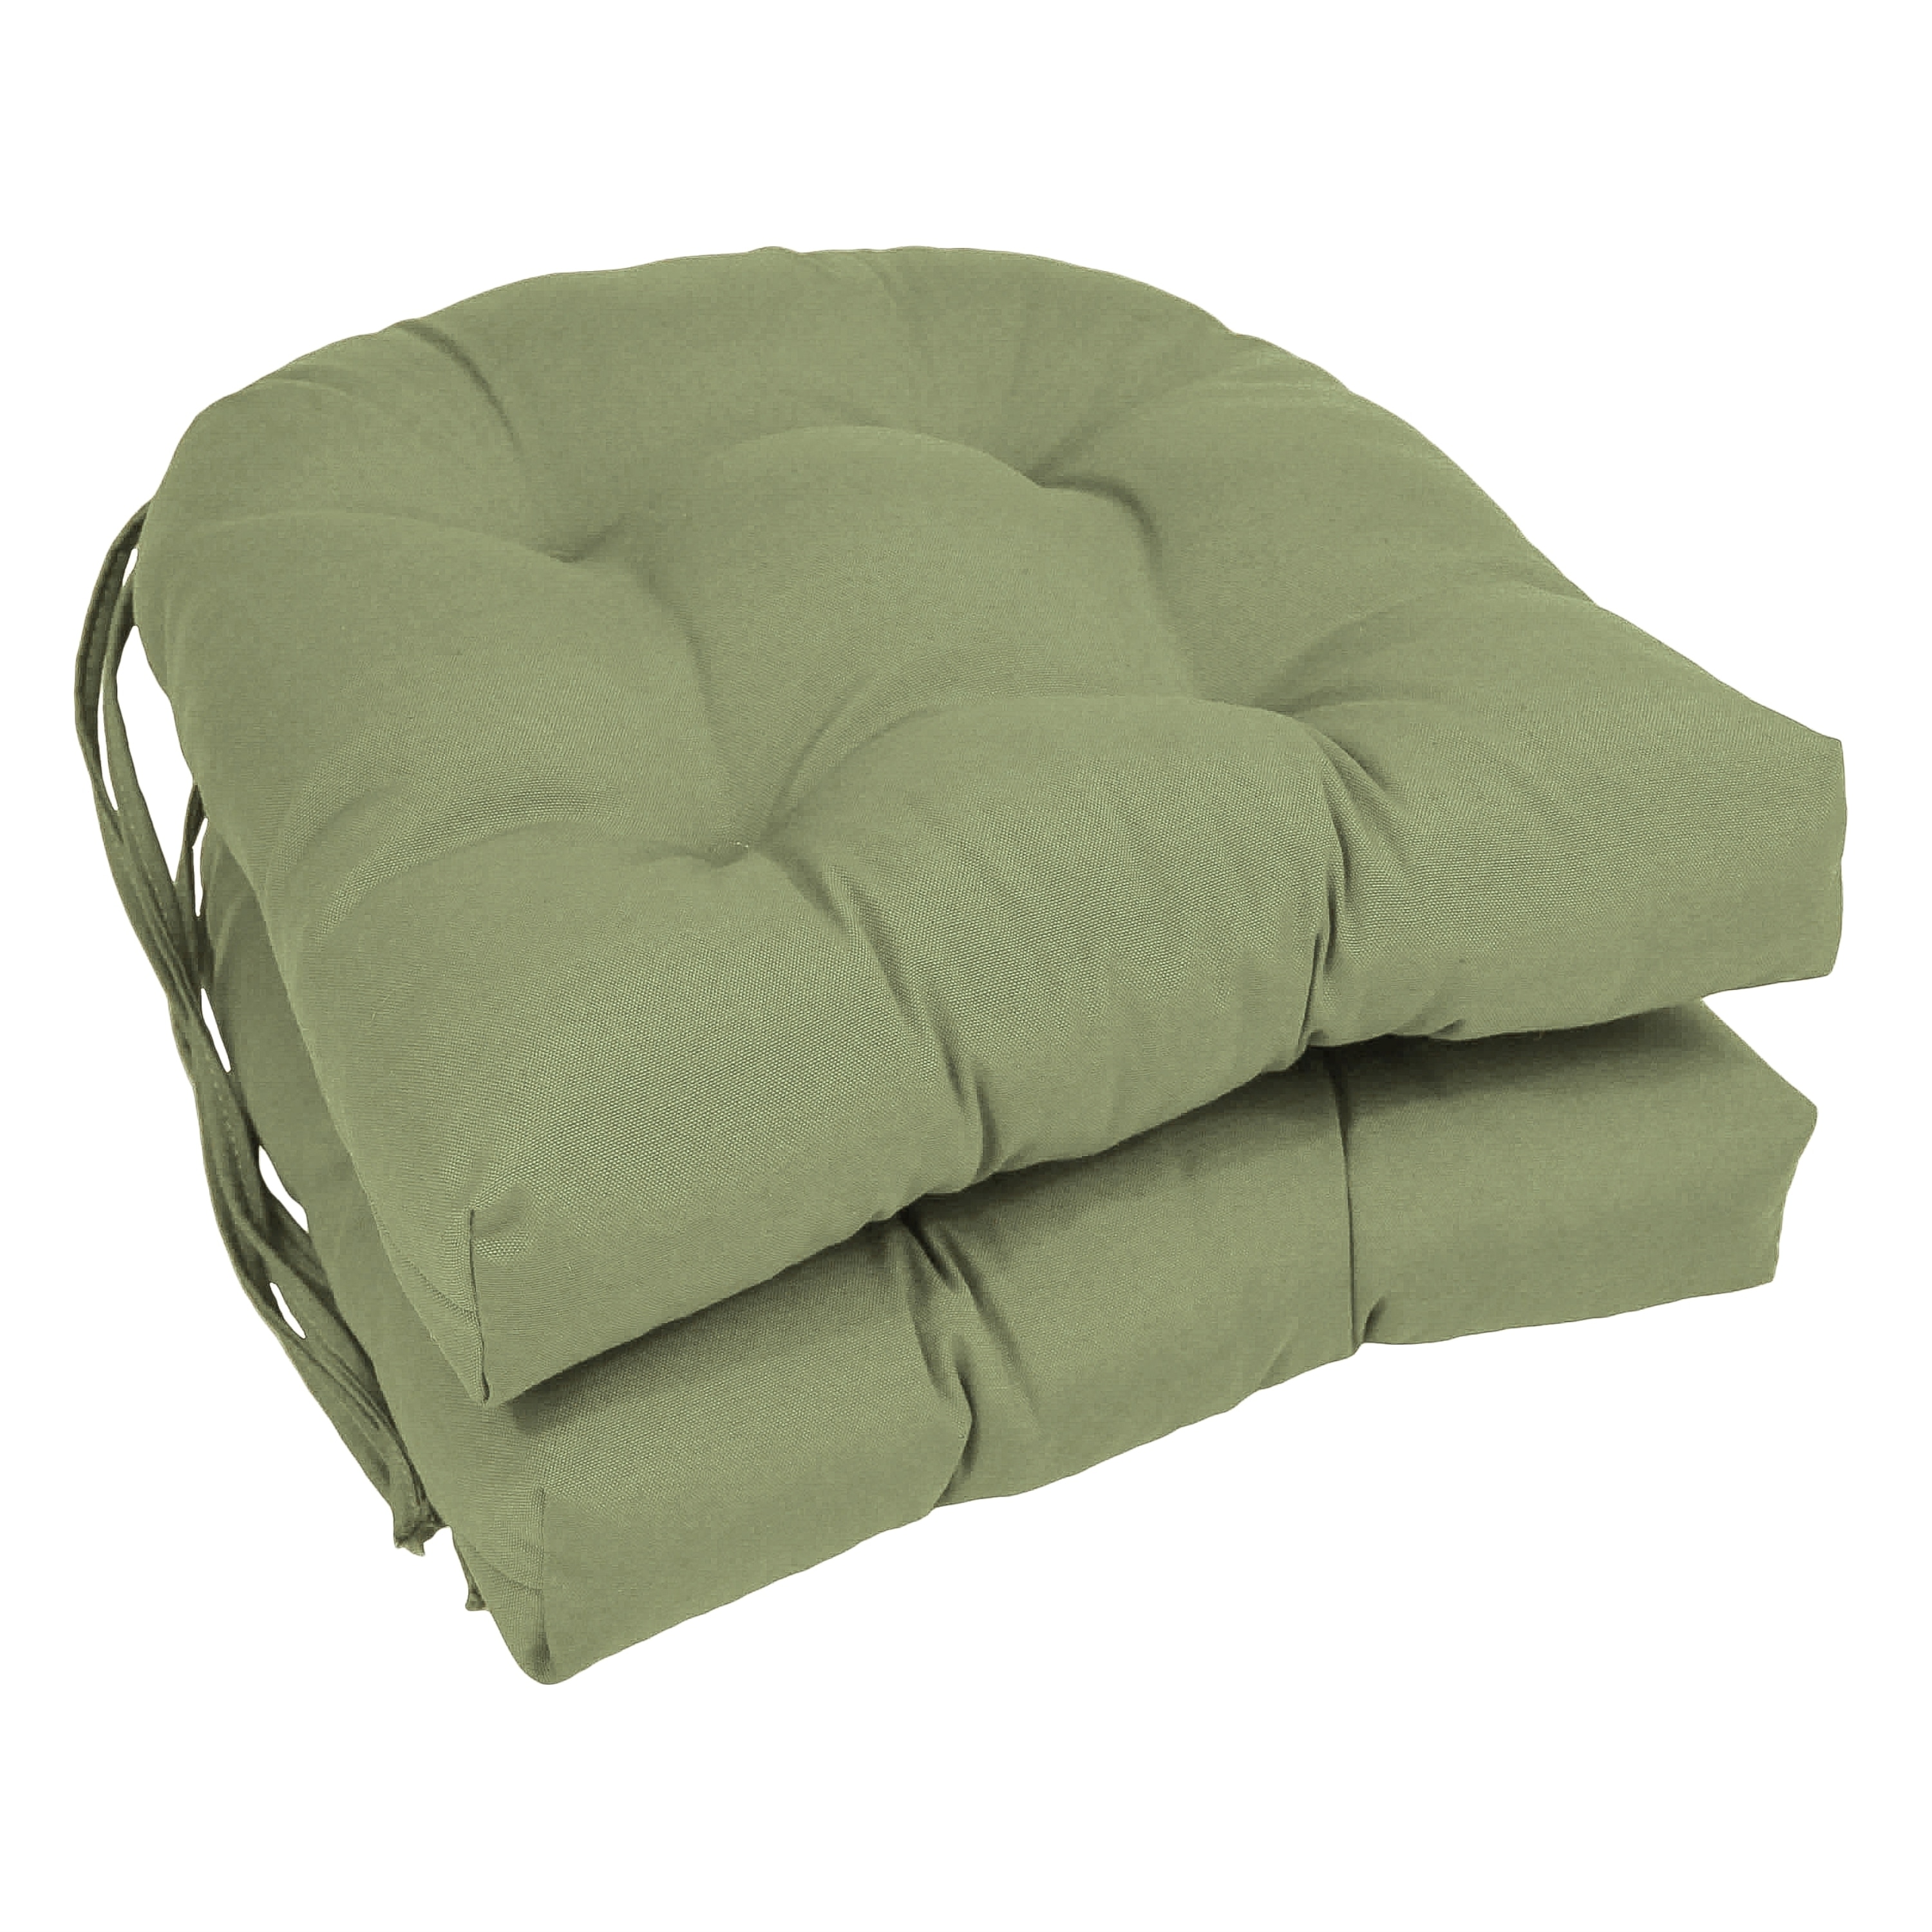 https://ak1.ostkcdn.com/images/products/is/images/direct/5381abf504dc124b6117b31fde5a456ed4dde756/16-inch-U-Shaped-Indoor-Chair-Cushions-%28Set-of-2%2C-4%2C-or-6%29.jpg